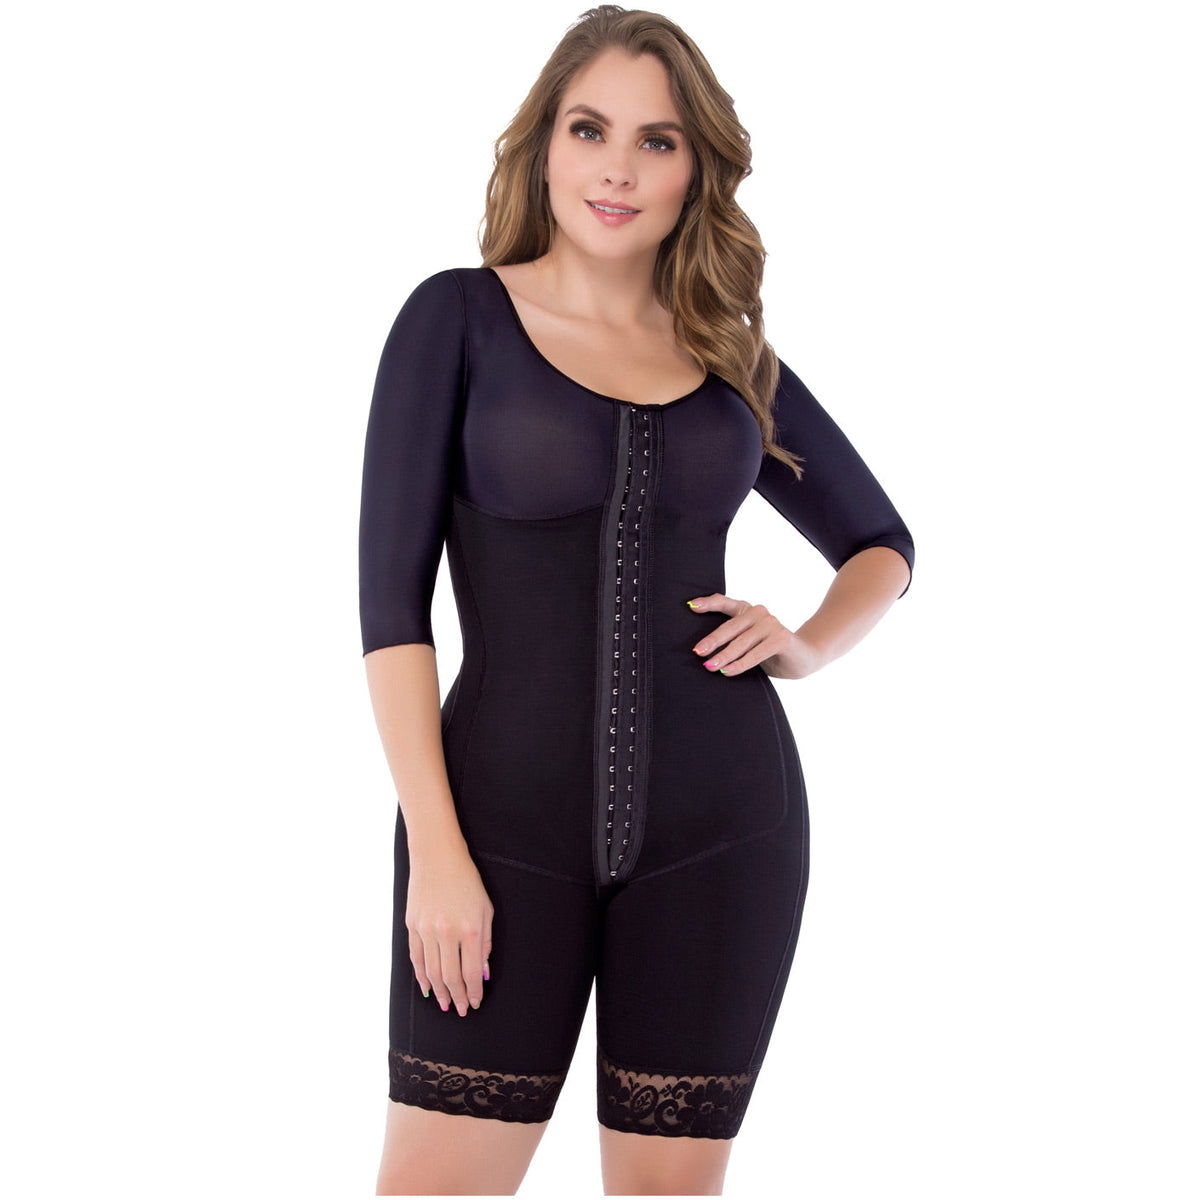 UpLady 6110 | Post Surgery Full Shapewear with Built-in Bra